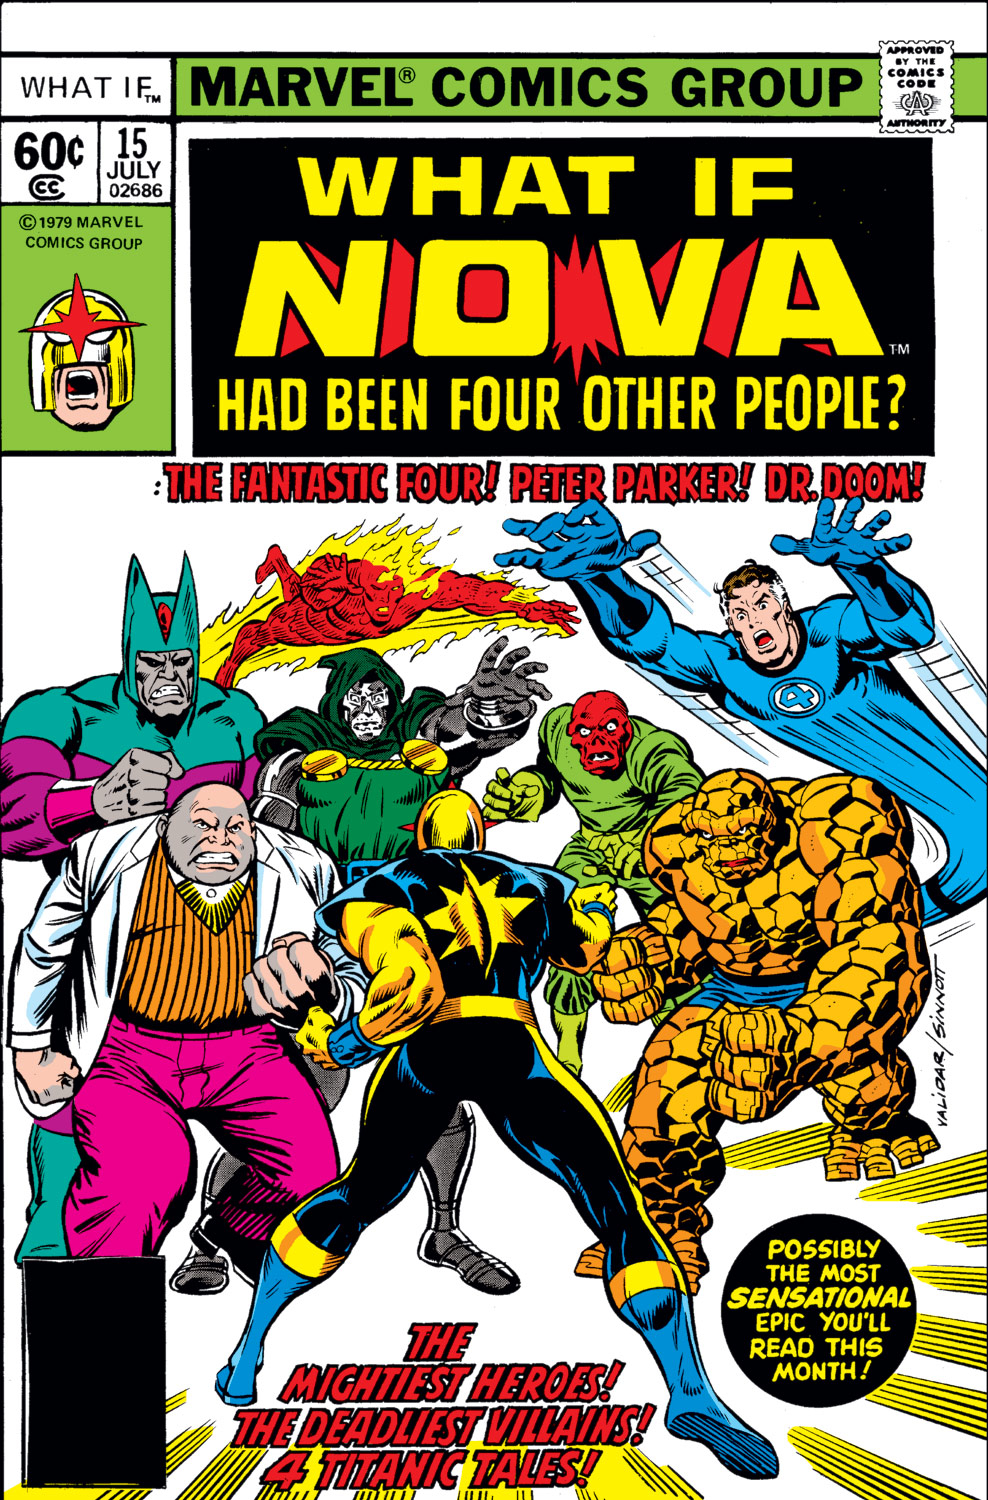 What If? (1977) issue 15 - Nova had been four other people - Page 1